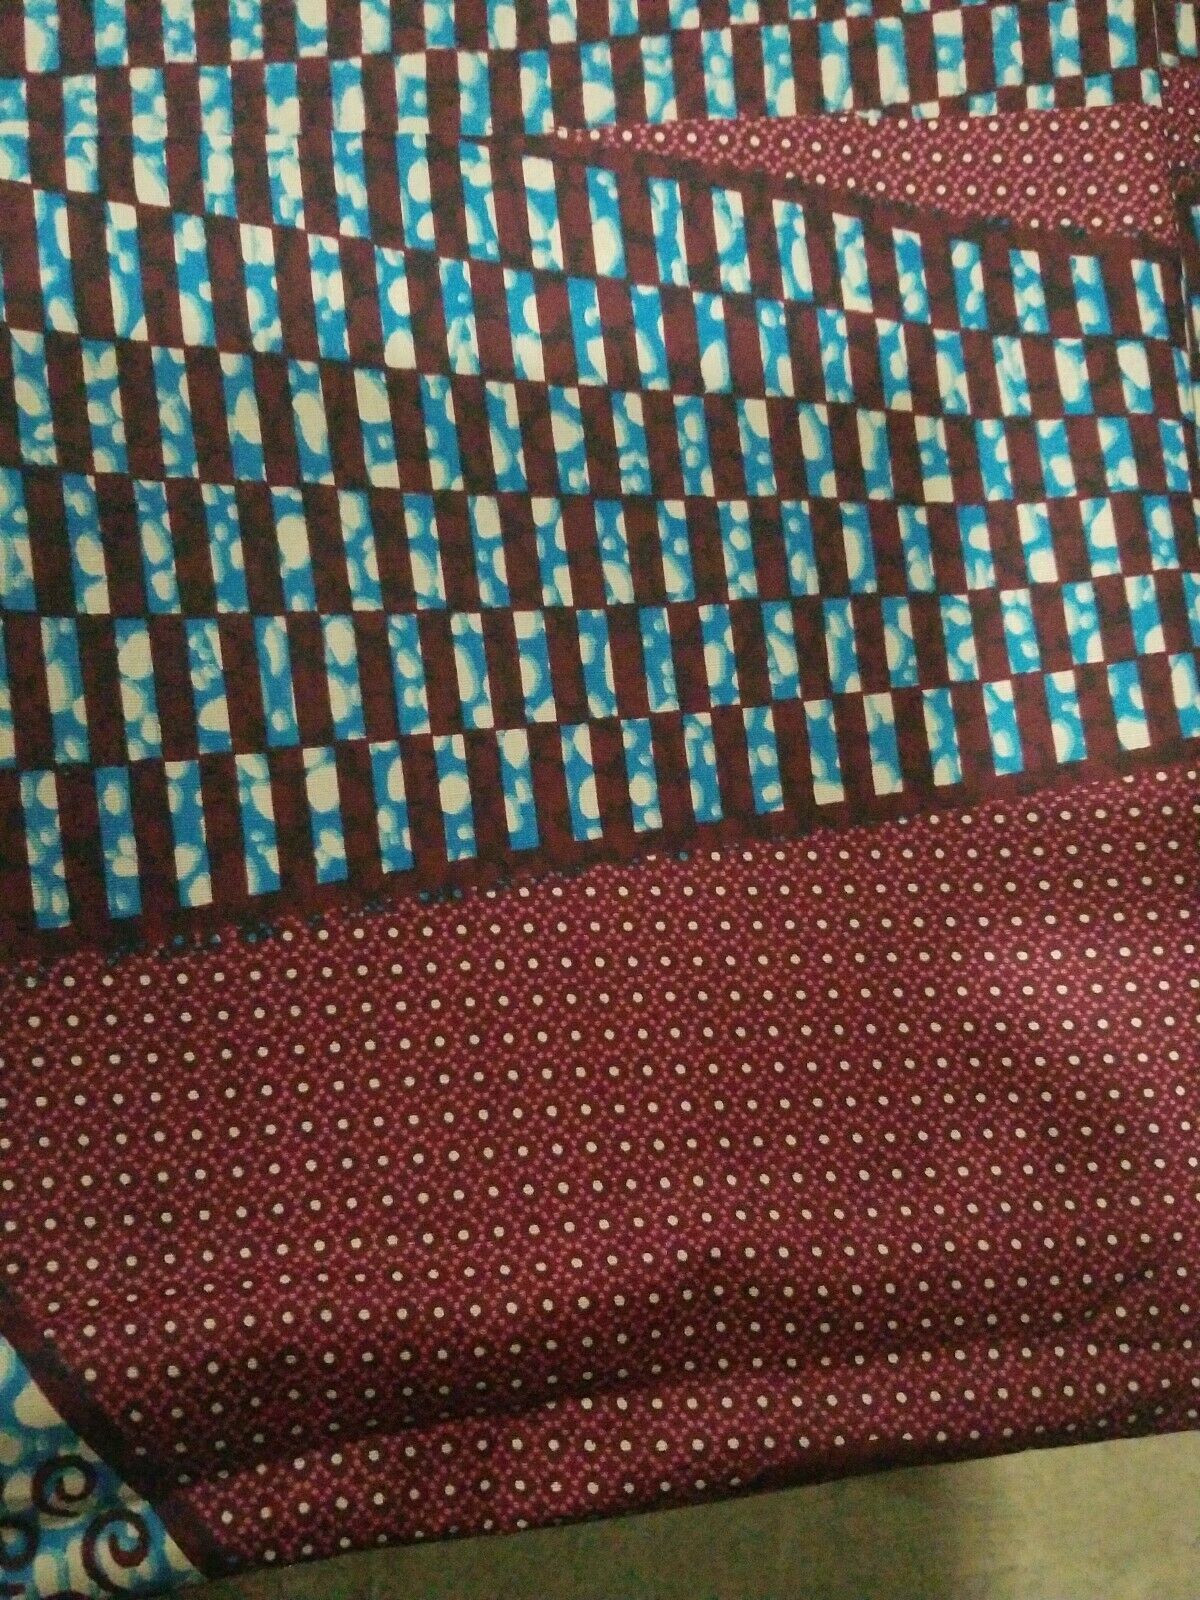 Brown MultiAfrican Print 100% Cotton Fabric ~6yards×46"~$32